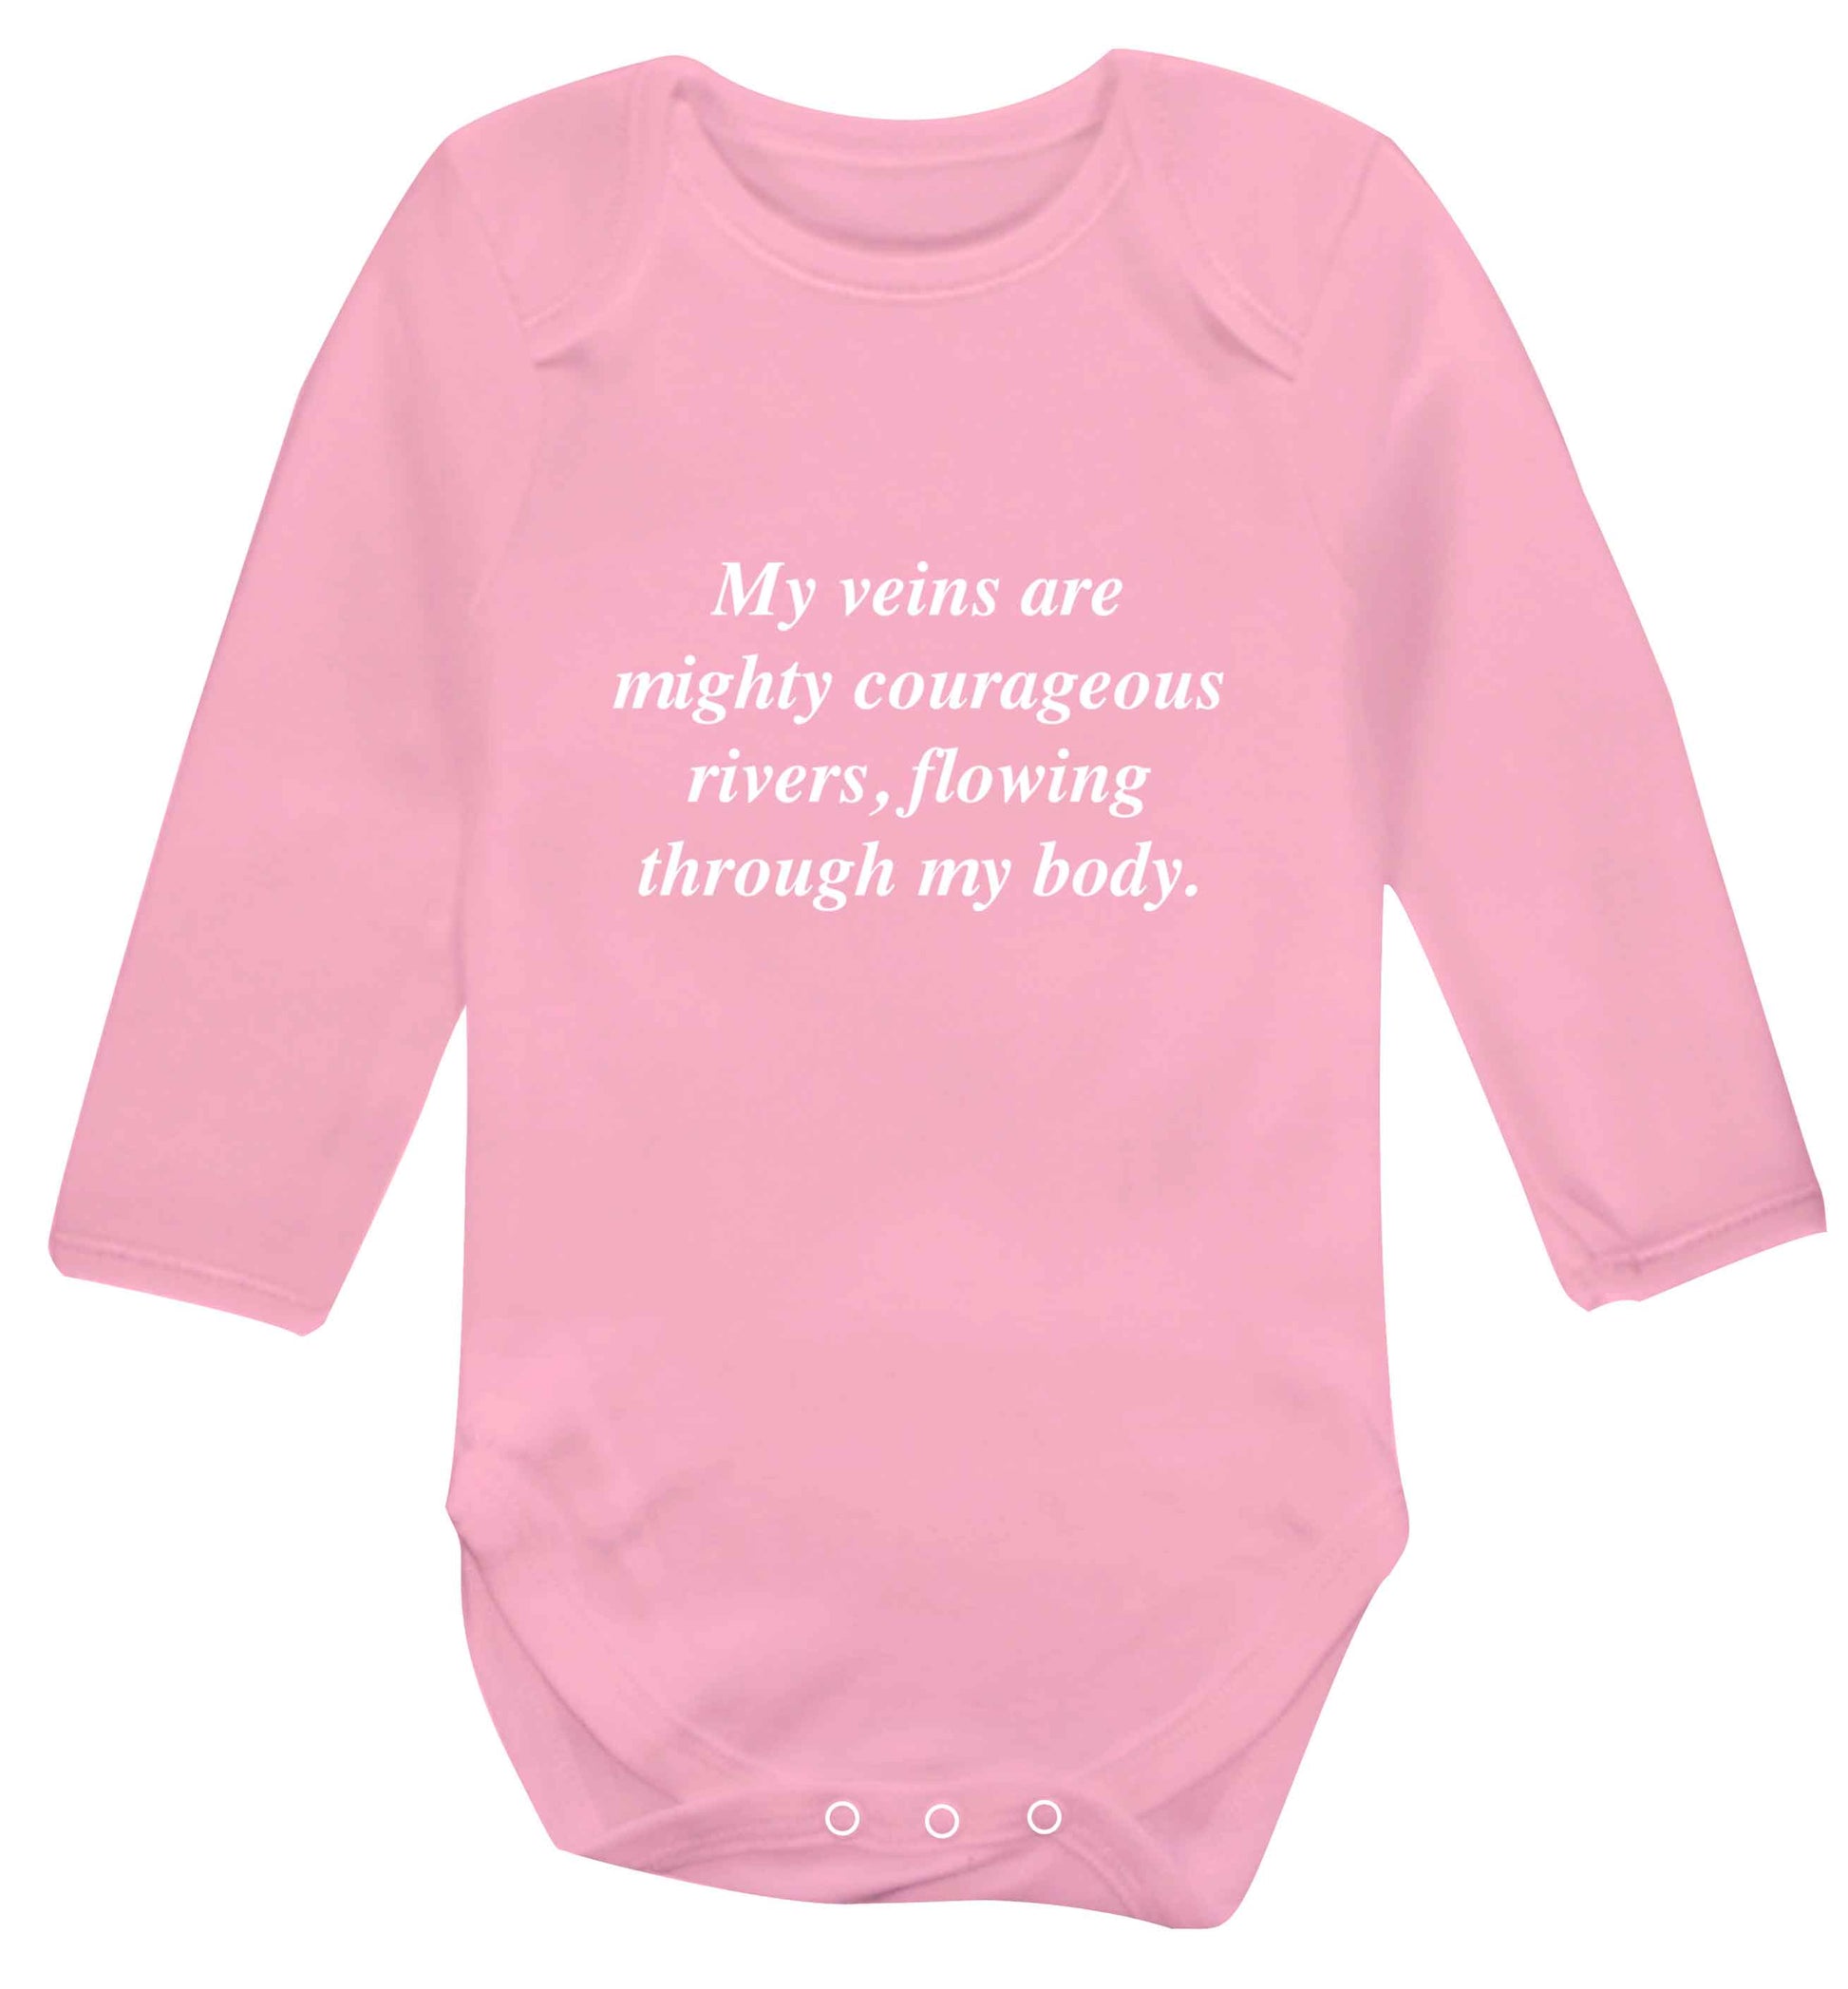 My veins are mighty courageous rivers, flowing through my body baby vest long sleeved pale pink 6-12 months